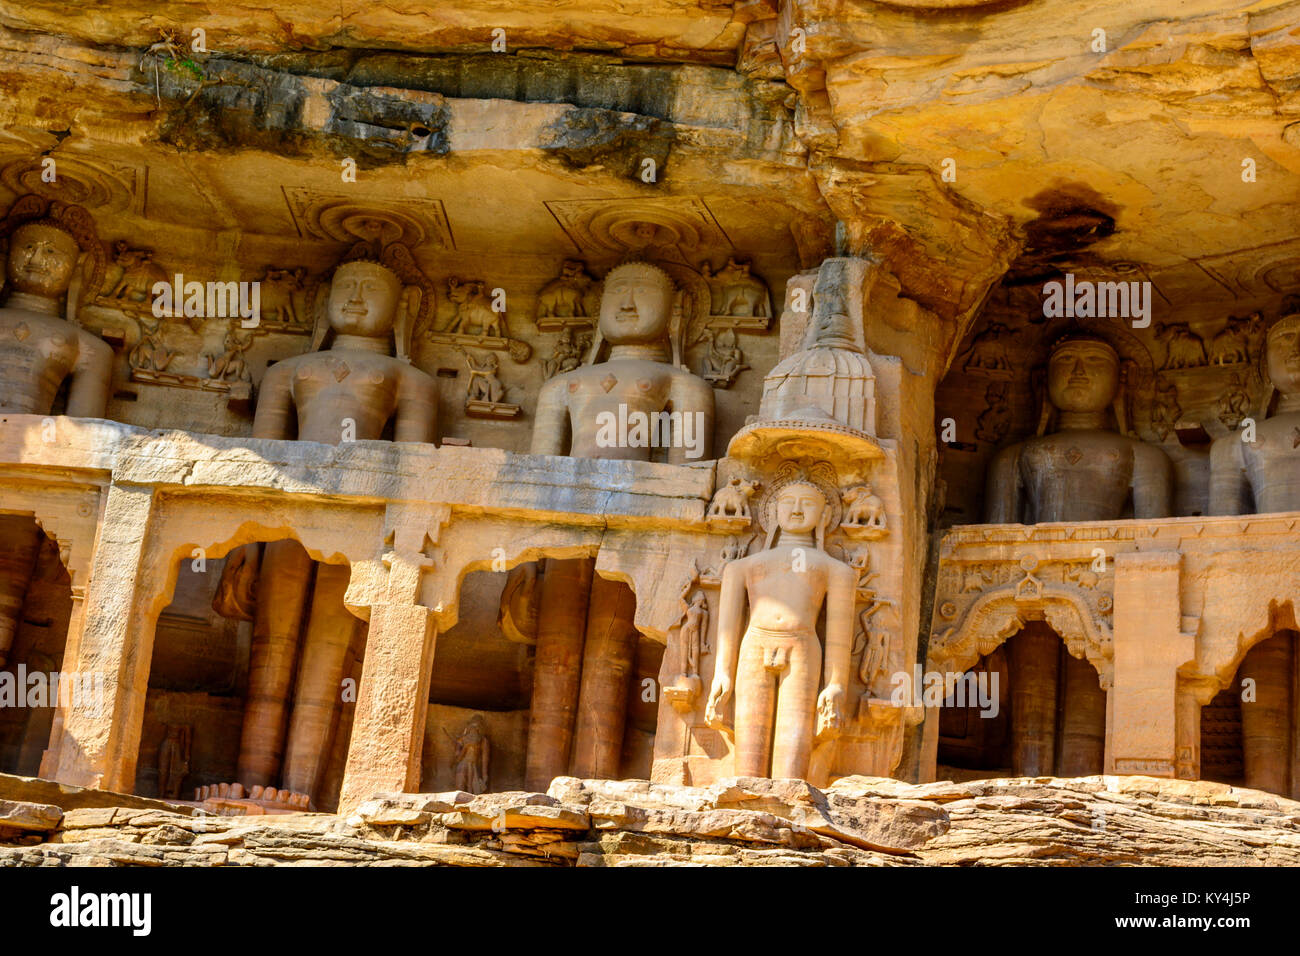 Ancient broken Buddha statues in the Rock of Gwalior / India Stock Photo